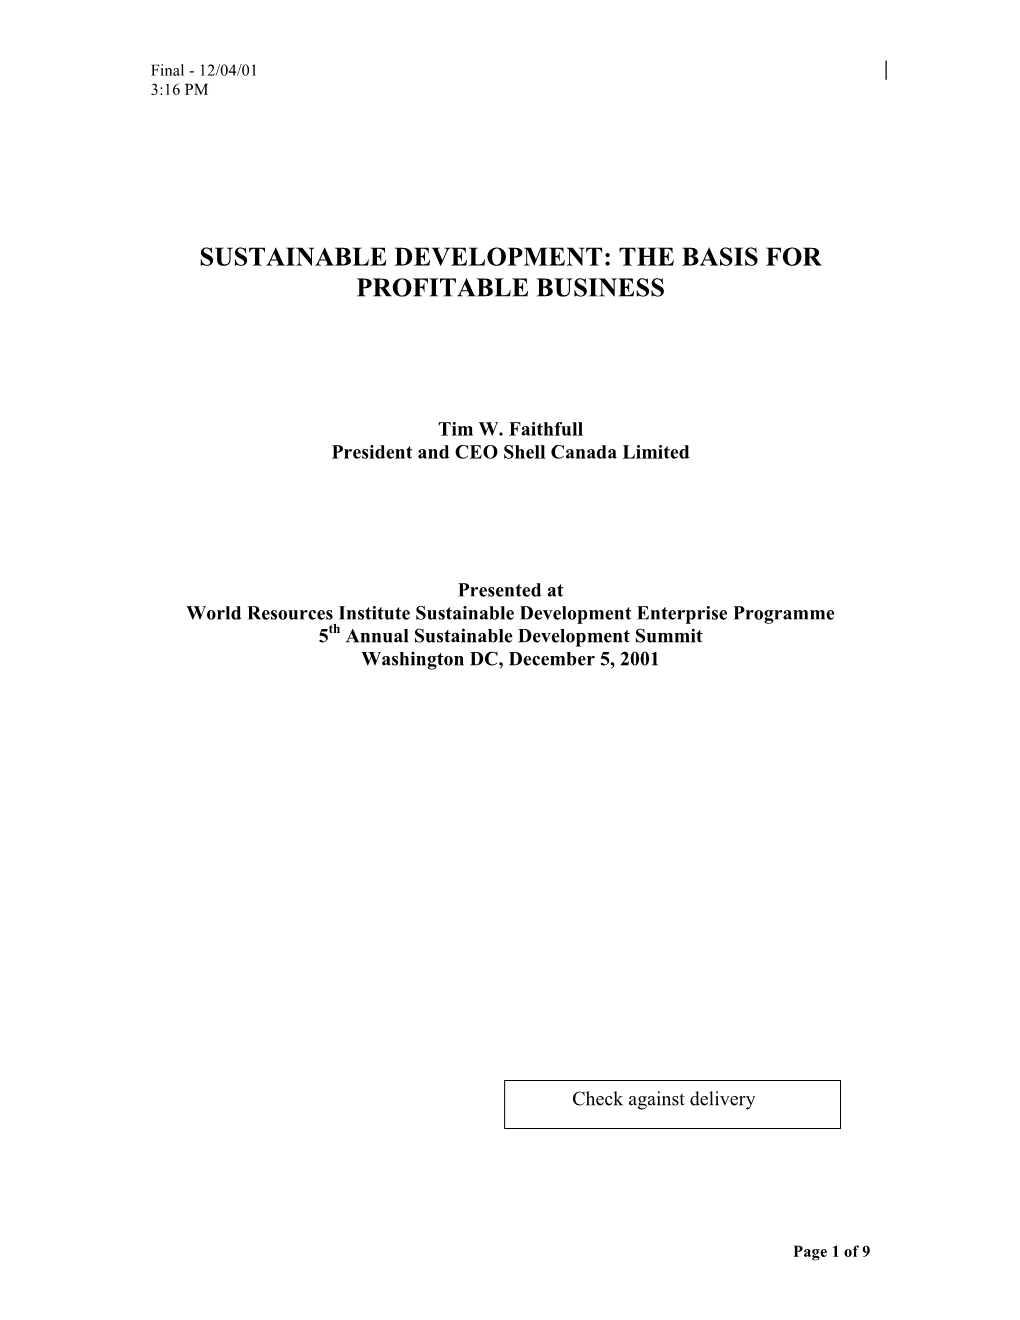 Sustainable Development: the Basis for Profitable Business